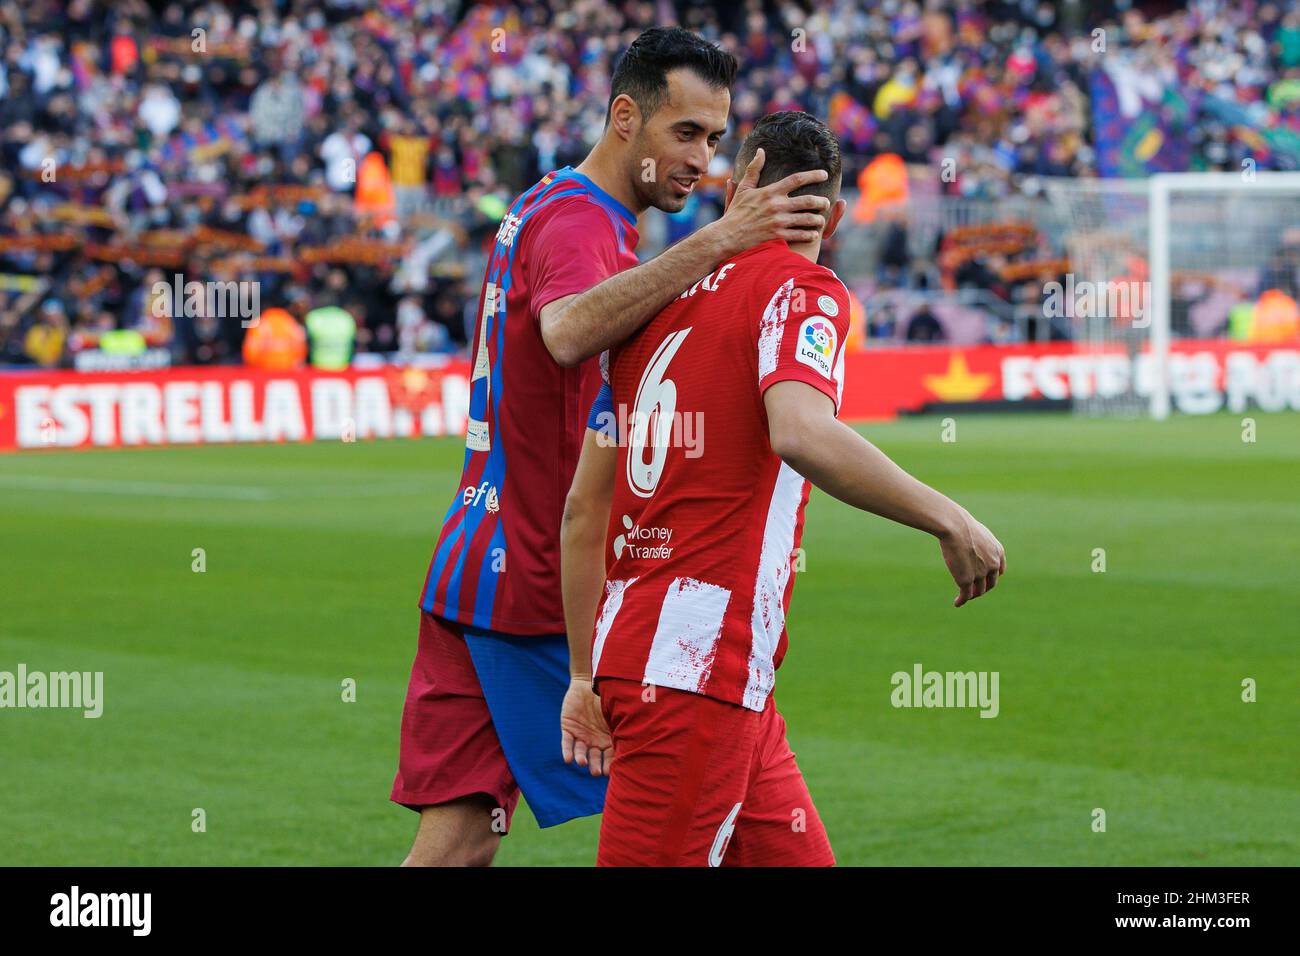 Barcelona, Spain. 06th Feb, 2022. Sergio Busquets of FC Barcelona with Koke of Atletico de Madrid during the Liga match between FC Barcelona and Atletico de Madrid at Camp Nou in Barcelona, Spain. Credit: DAX Images/Alamy Live News Stock Photo